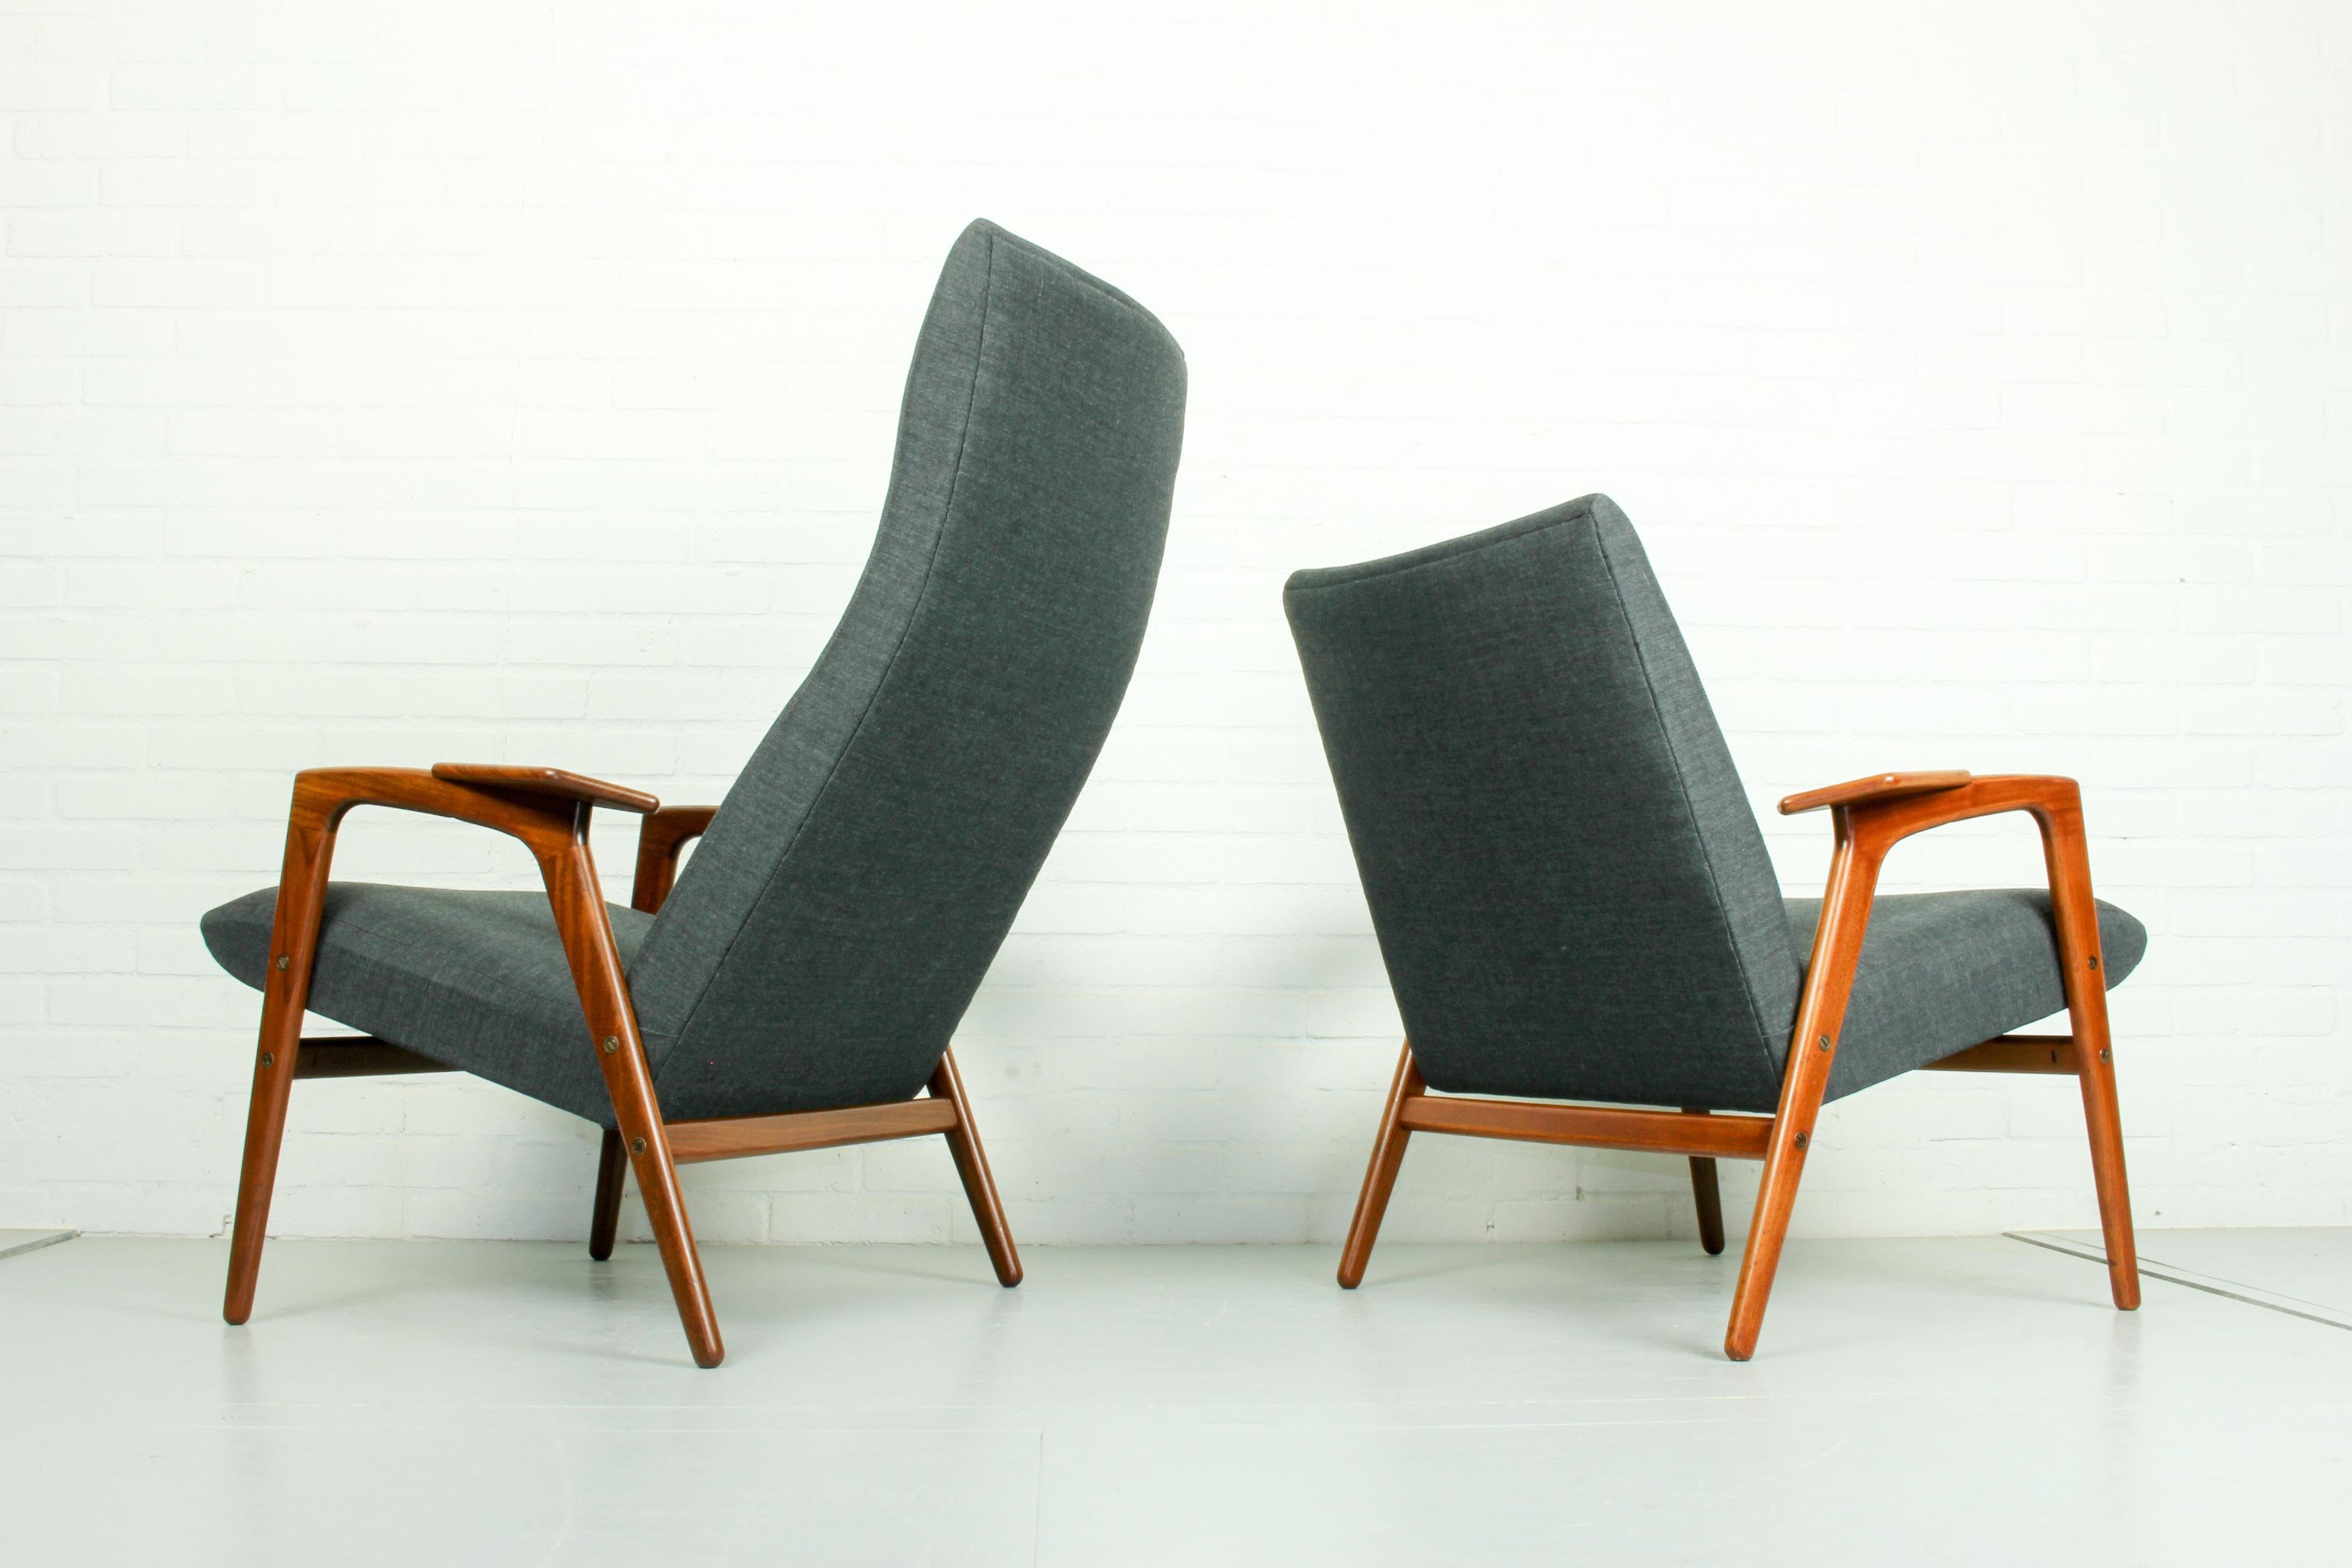 Very nice set of high and low easy chair by Yngve Ekström for Pastoe. The original design for these chairs was part of the Mingo-series and made for ESE-möbler / Swedese. The models we have were documented in the Pastoe catalogs and were displayed